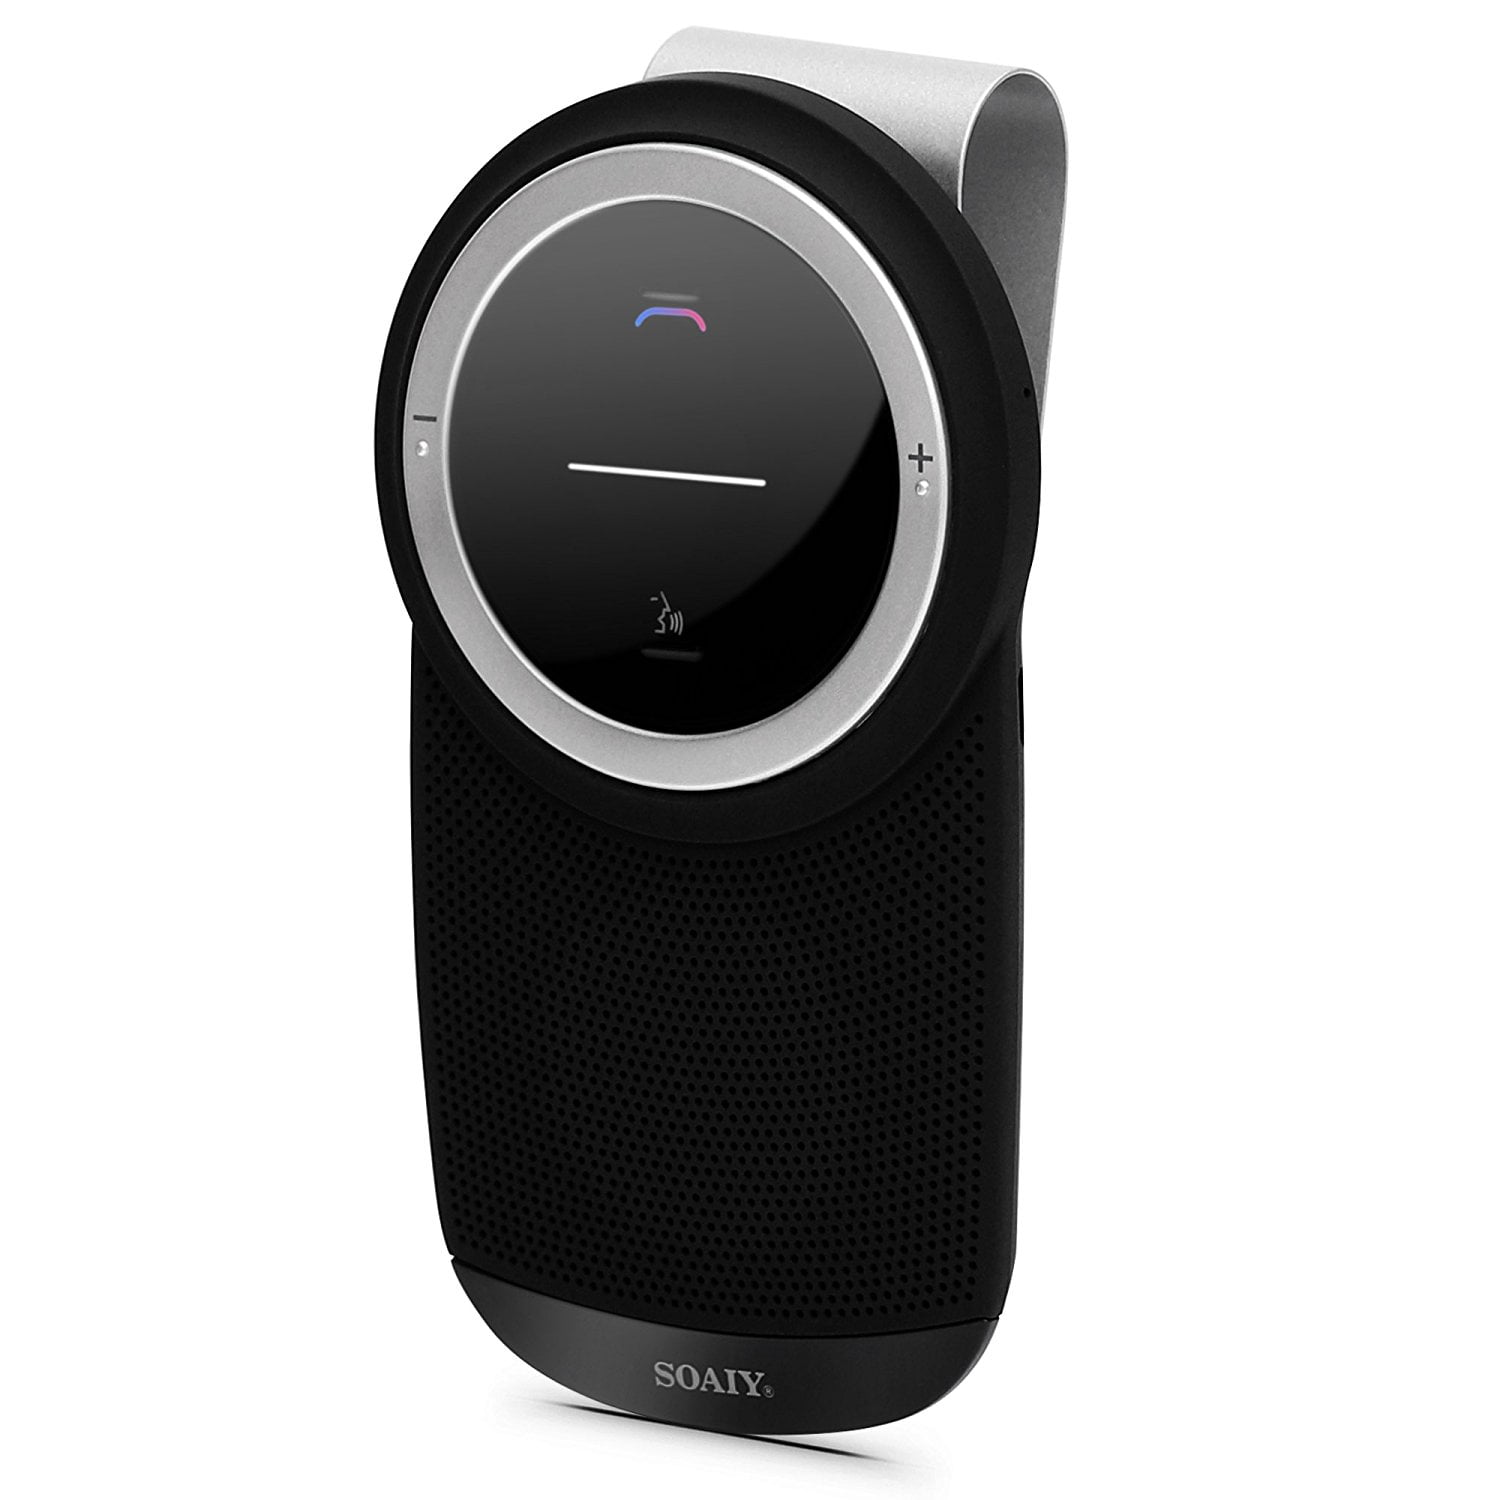 SOAIY S-61 Bluetooth Car Kit Bluetooth Speakphone Sun Multipoint Connection A2DP Streaming Samsung, HTC, LG, Android Phones&Tablet - Walmart.com